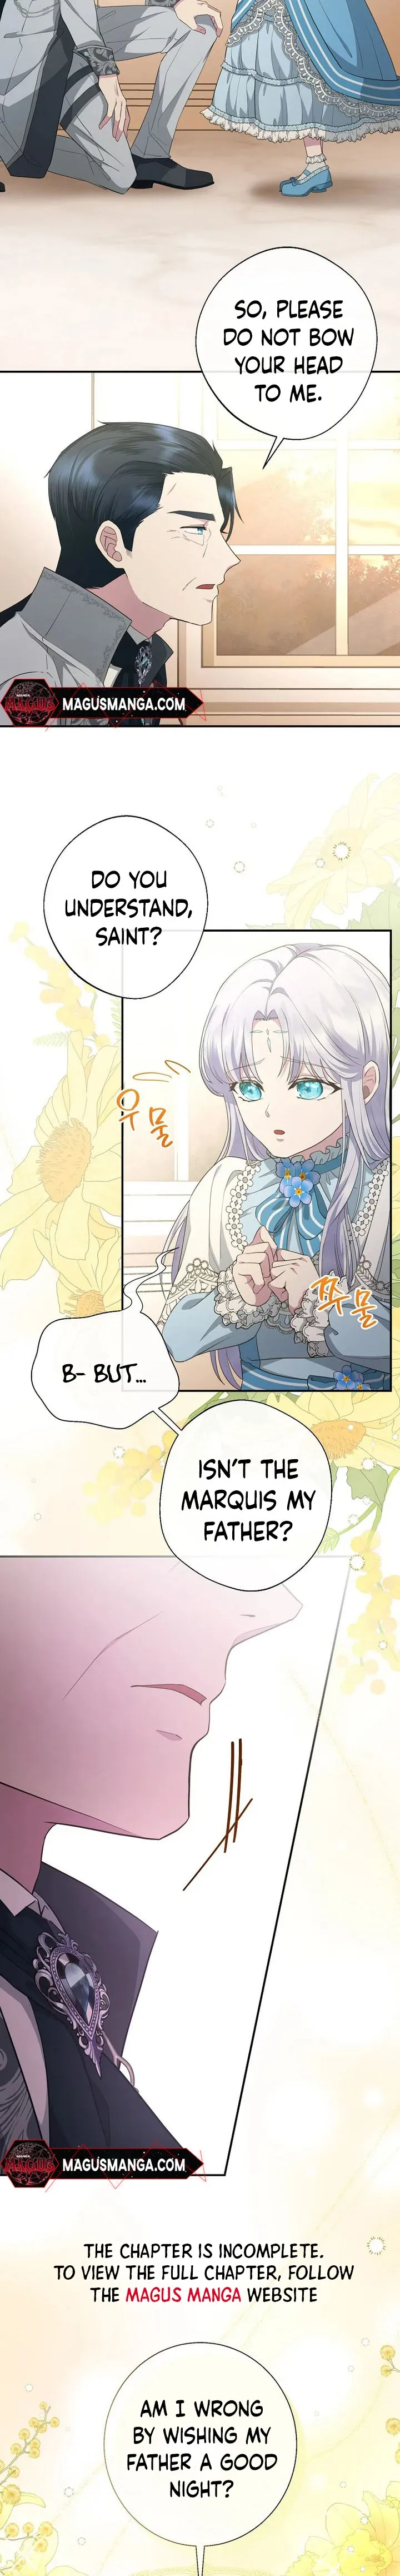 The Blooming Violet in the Back Garden chapter 8